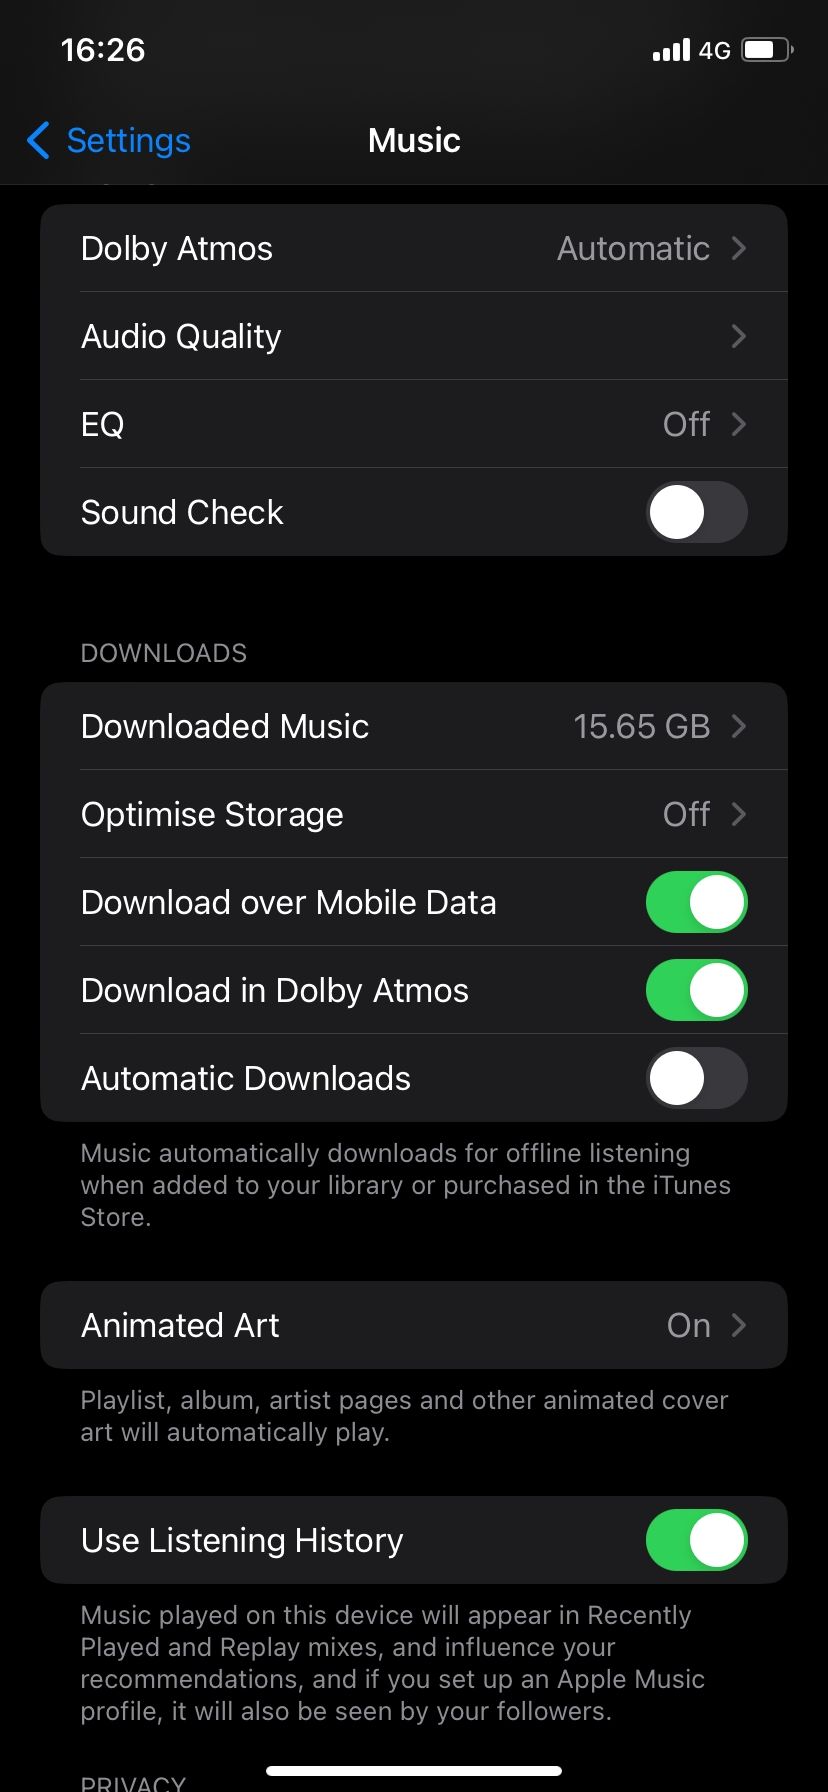 Download over Mobile Data enabled on Apple Music